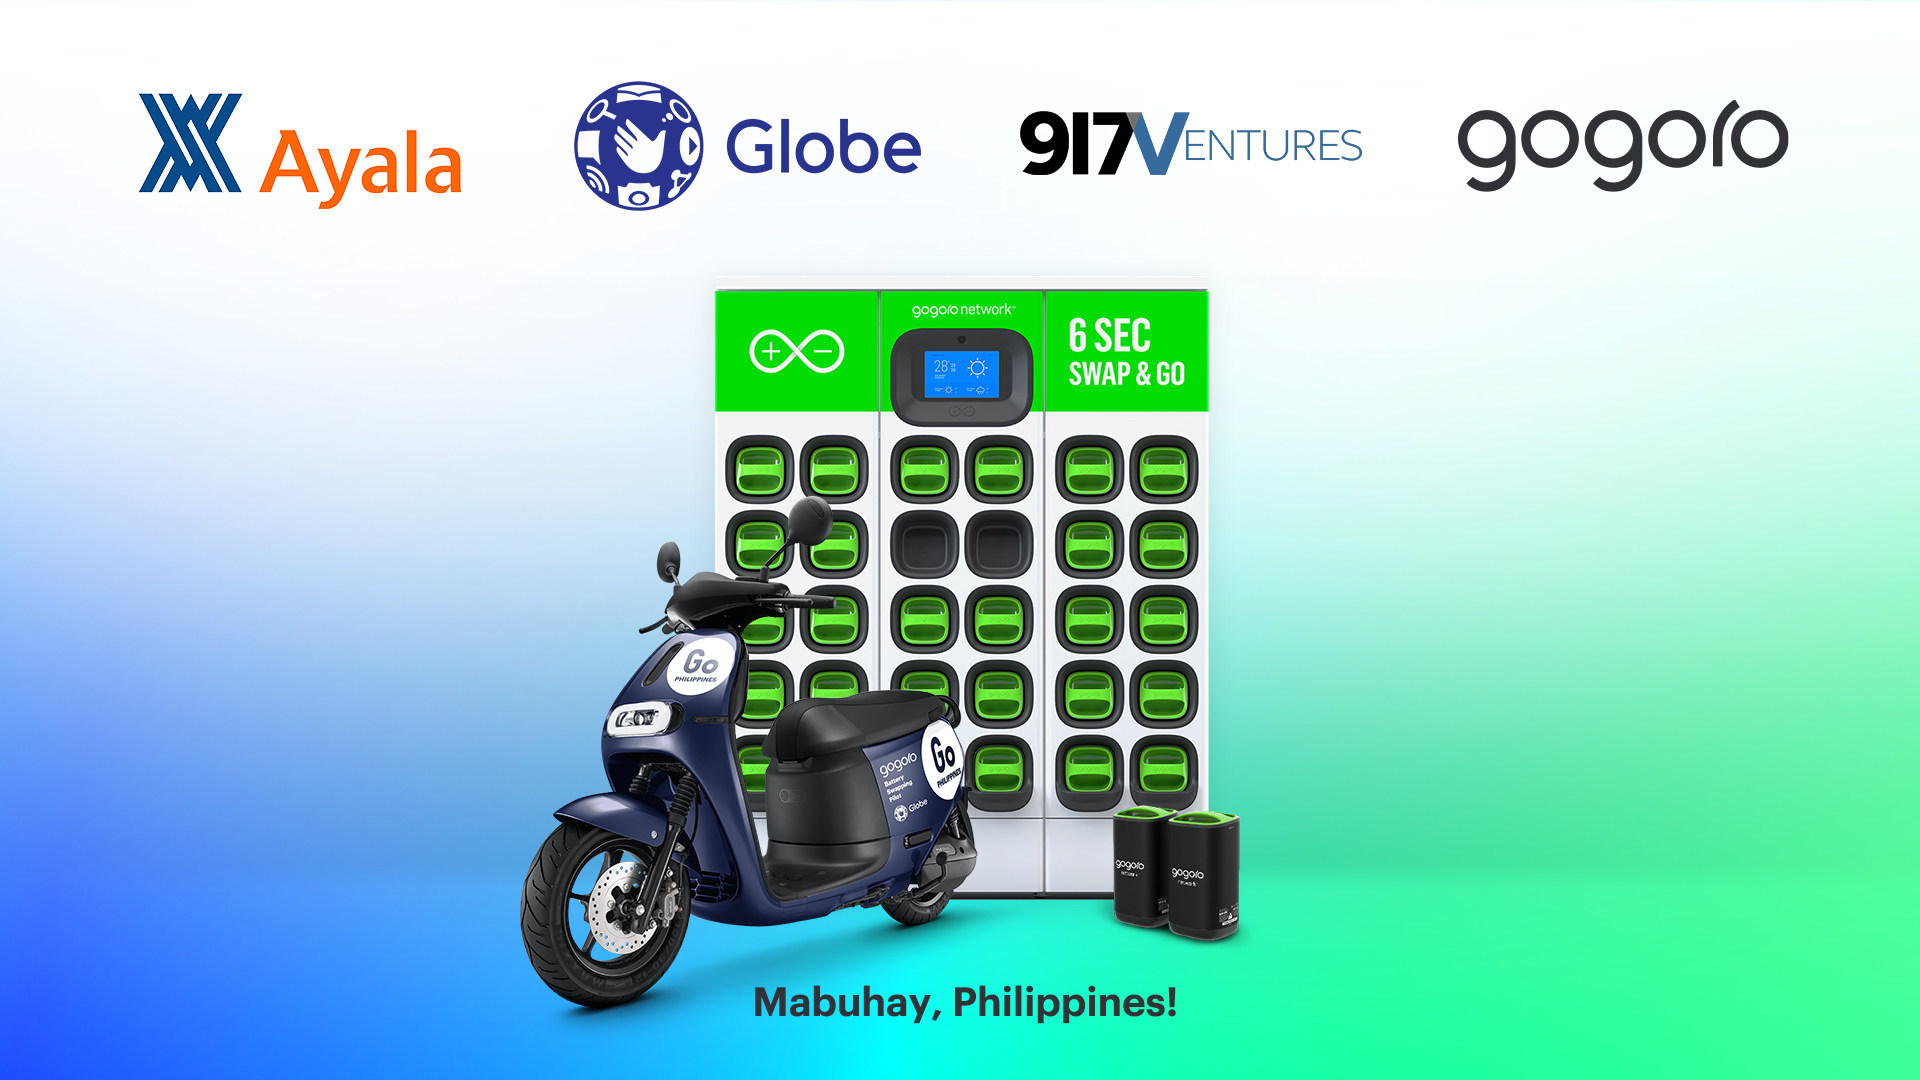 Gogoro, Globe's 917Ventures and Ayala Corporation Partner to Bring Battery Swapping and Smartscooters to the Philippines